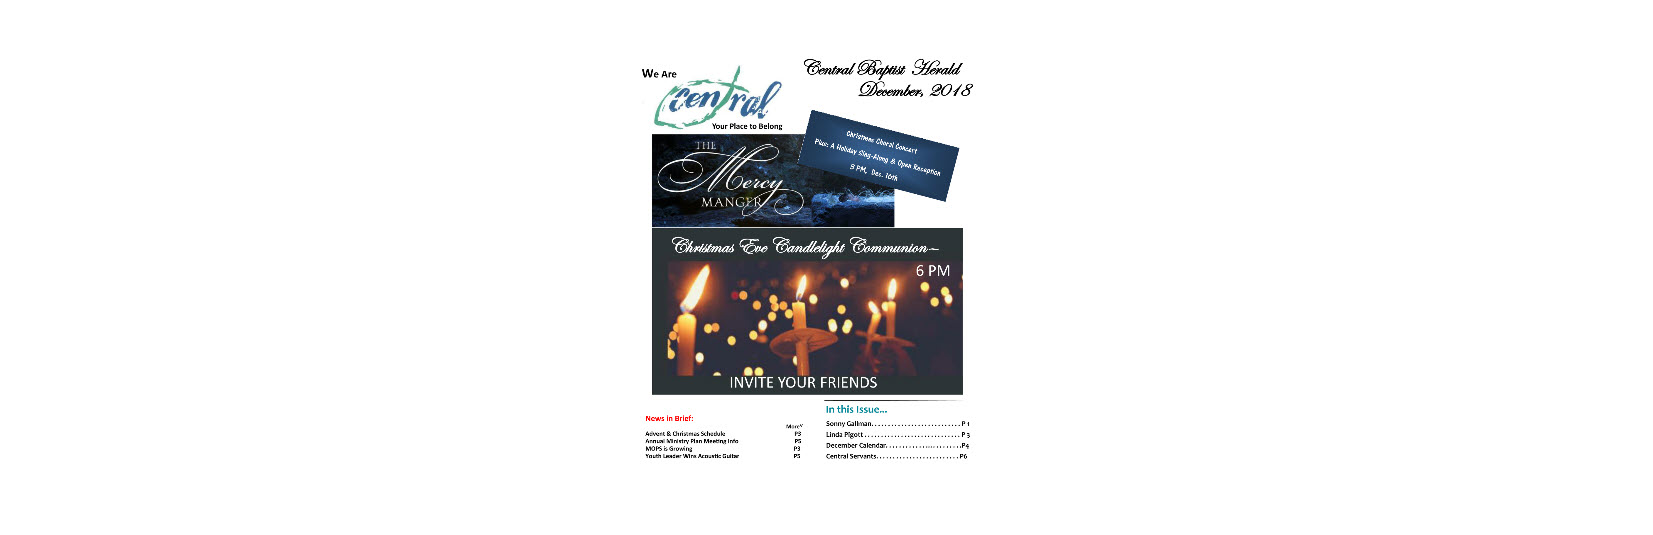 December Central Herald Newsletter Now Available